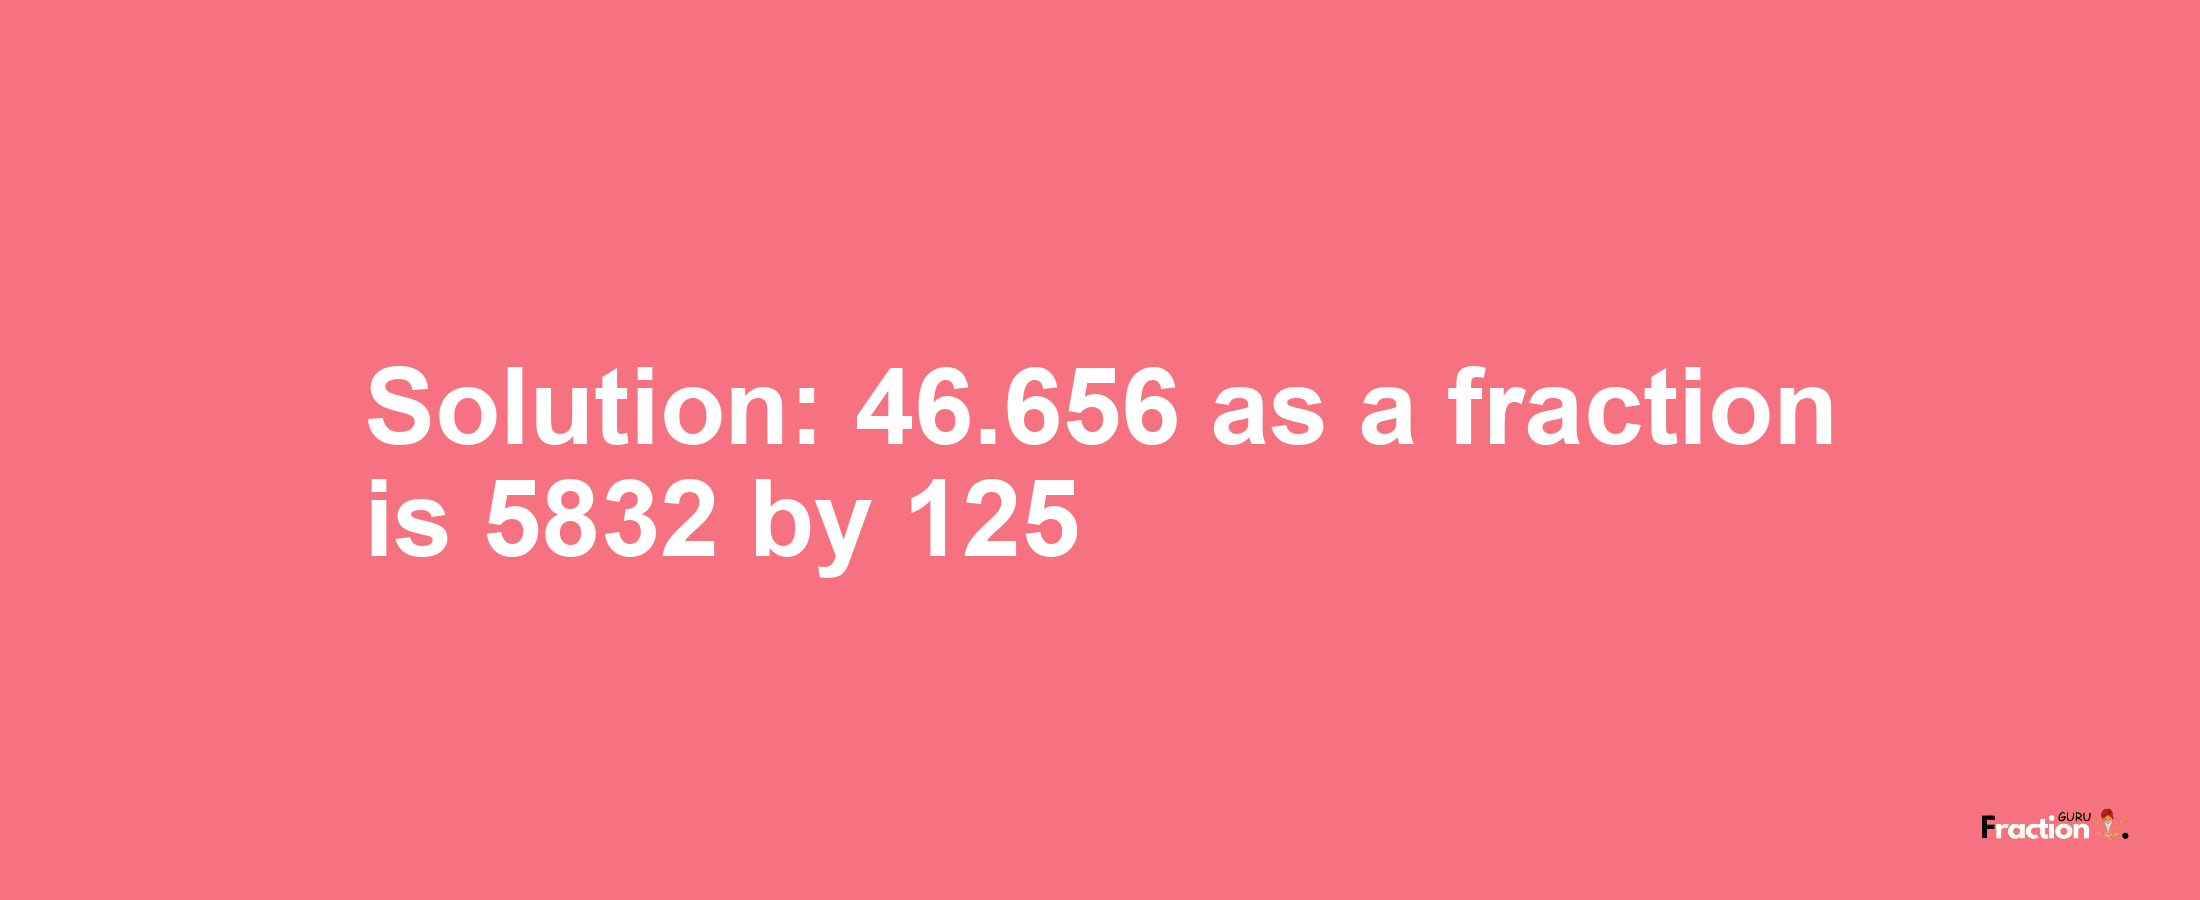 Solution:46.656 as a fraction is 5832/125